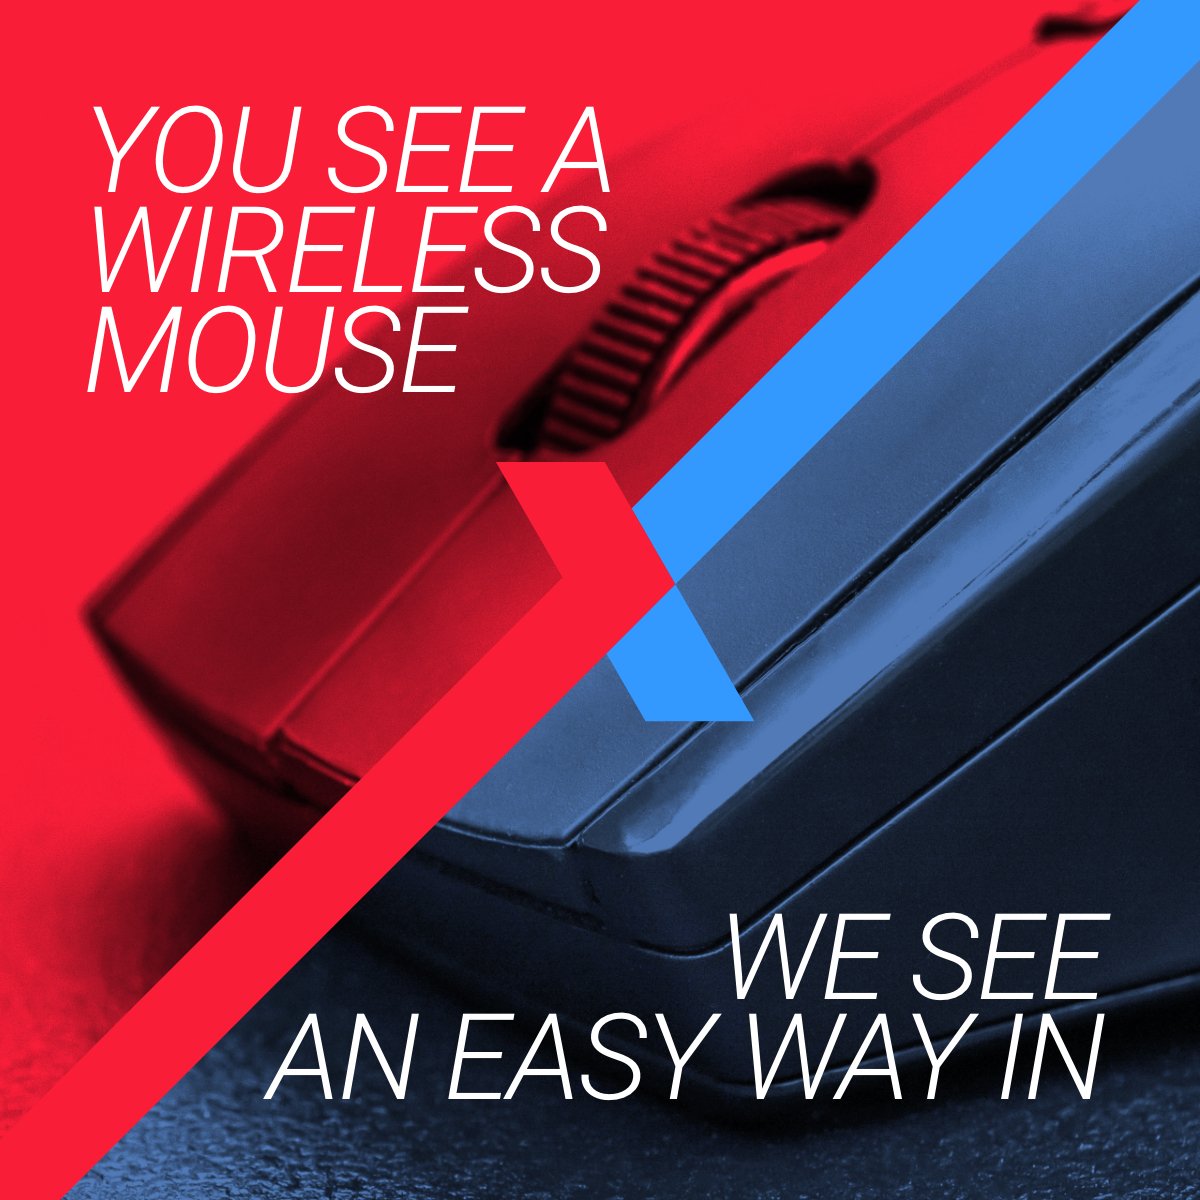 You See a Wireless Mouse. We see an easy way in.